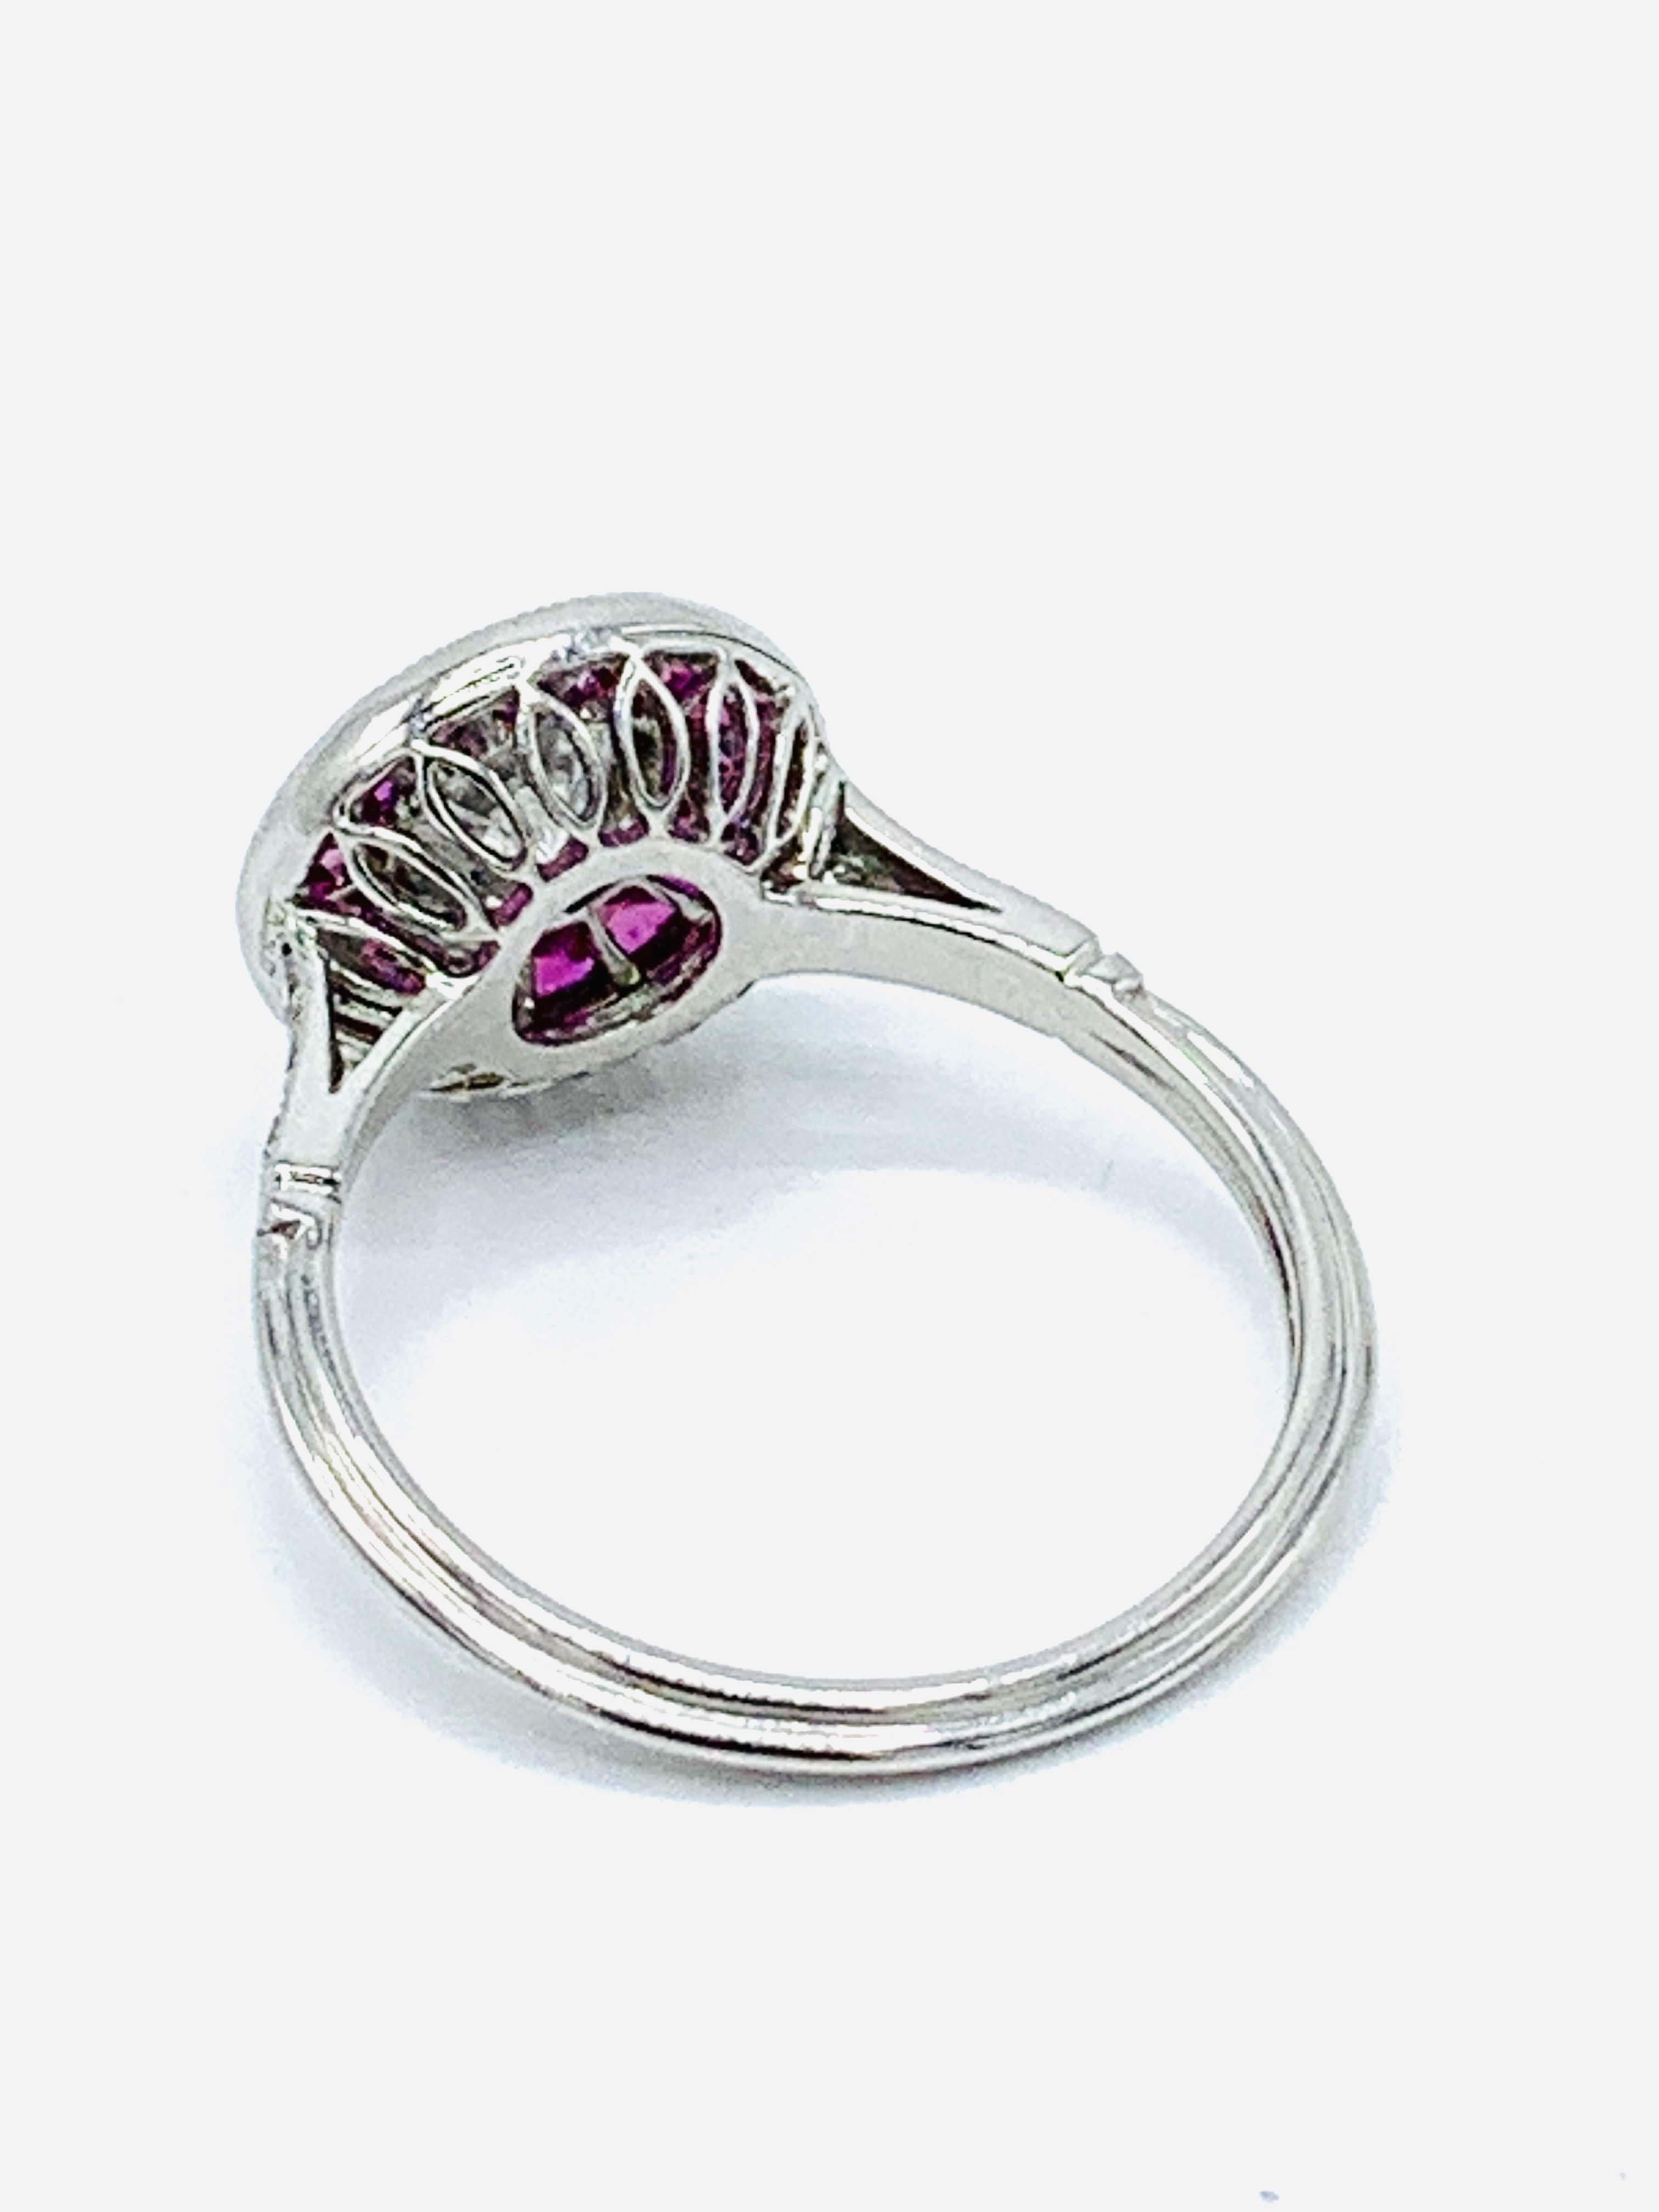 White gold and ruby target ring. - Image 4 of 4